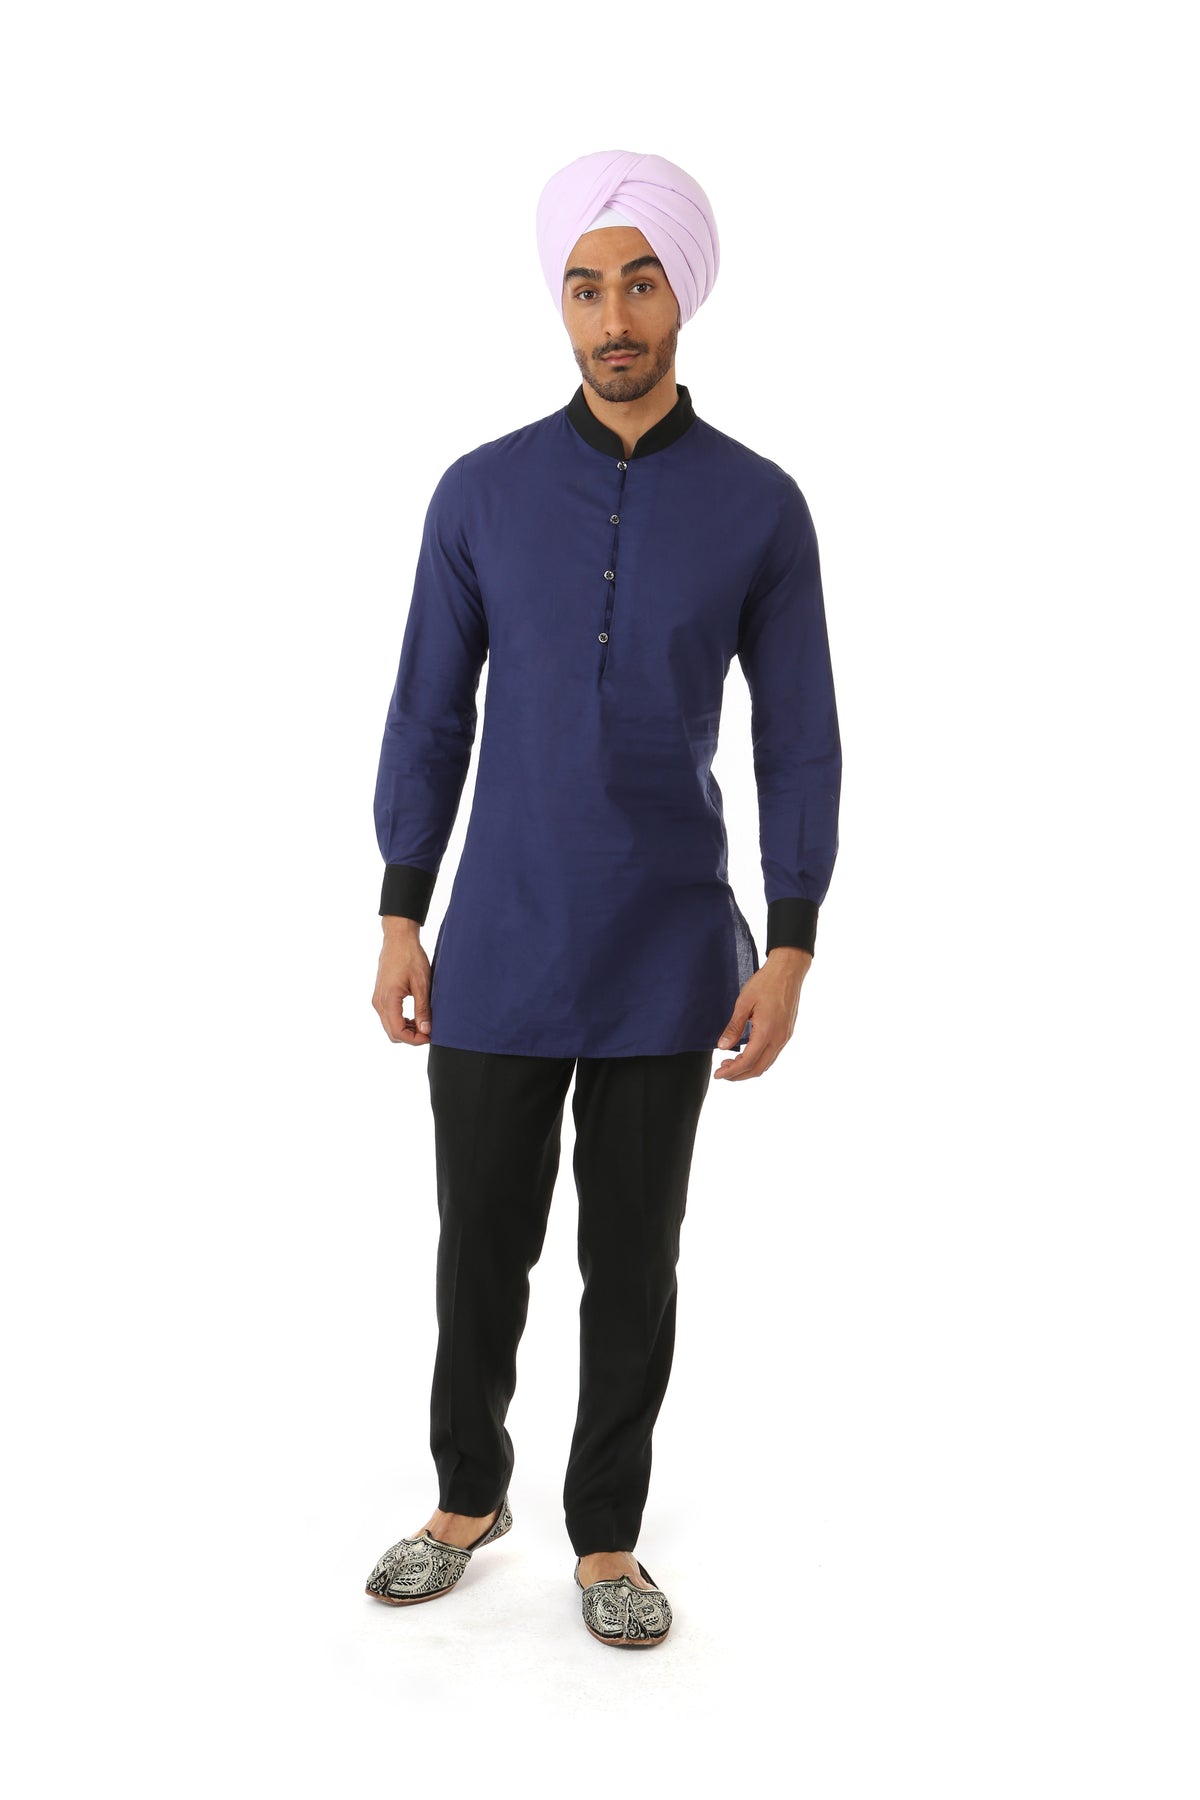 Harleen Kaur SUMEET Colorblock Collar Shirt in Navy and Black - Front View